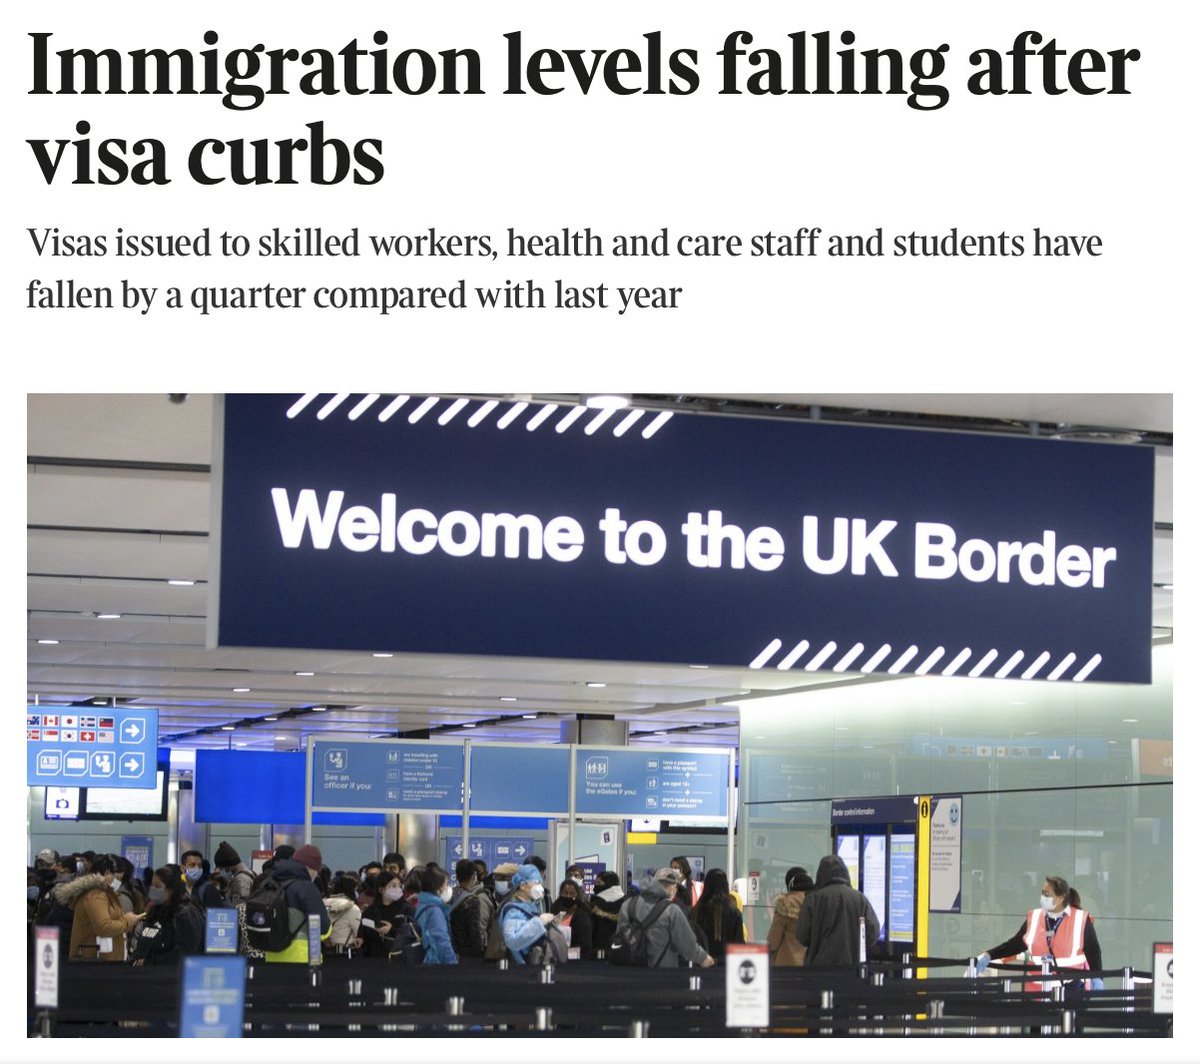 Today's Times. The govt's new visa changes have caused an 83% fall in visas granted to health & care workers. We have: 152k social care vacancies 121k NHS vacancies. This is catastrophic for our NHS & care sectors. The govt is putting anti-immigrant populism above care.